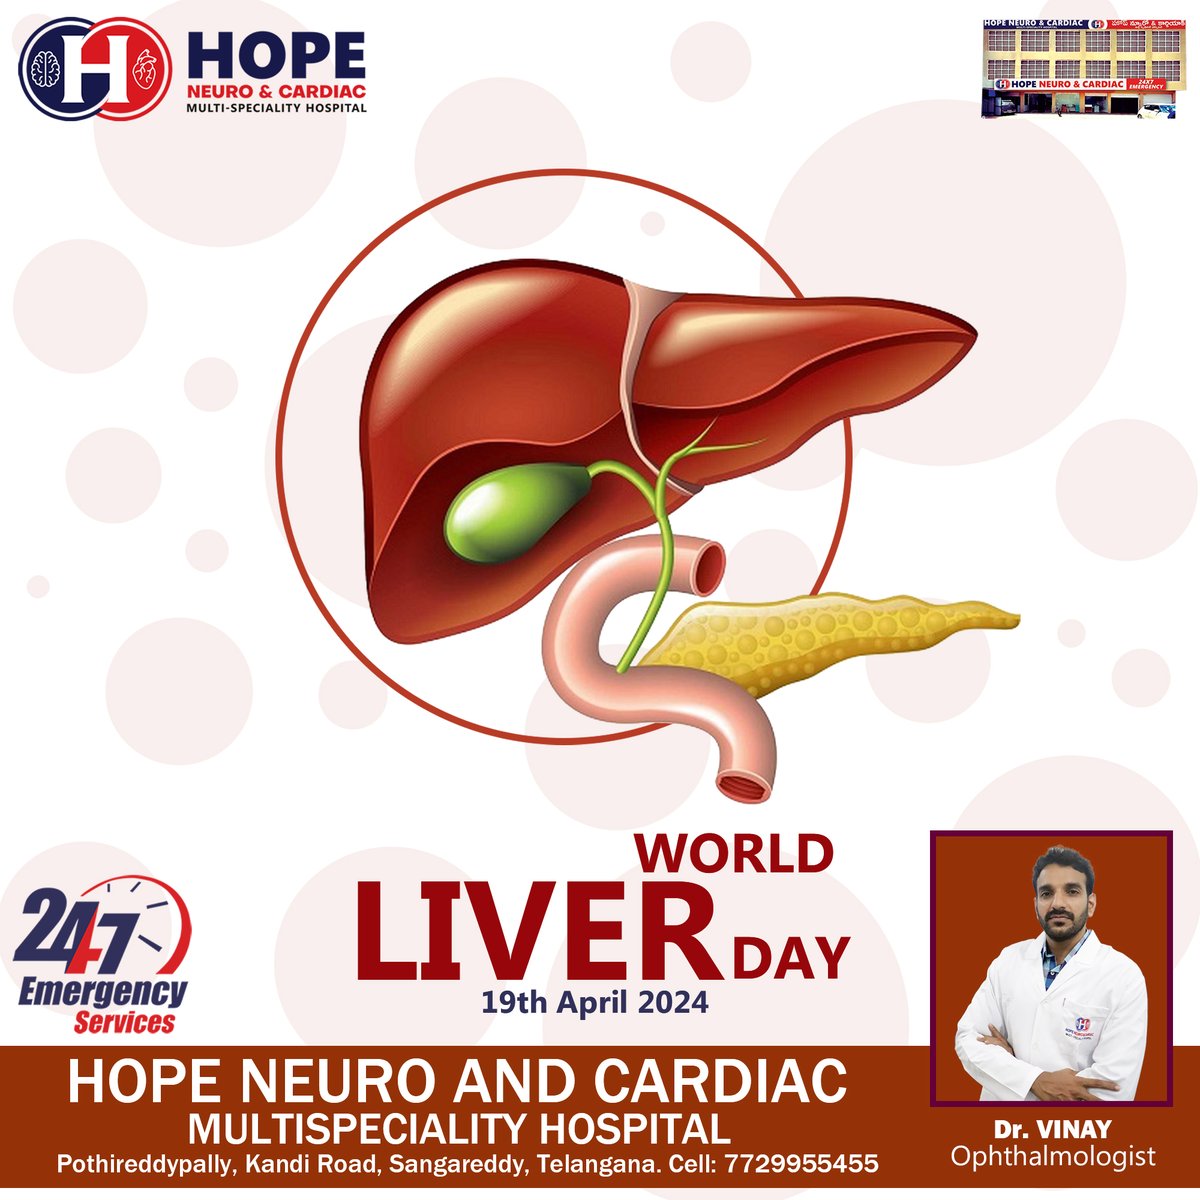 Happy Liver Day 
Hope Neuro & Cardiac MultiSpeciality Hospital Sangareddy 
Dr. Vinay (Ophthalmologist)
For appointment : 7729955455
#hospitalitycareers #hospitalityjobs #Neurosurgeon #neurologist #cardiacarrest #cardio #HeartAttak #healthyfoods #besthospital #ophthalmology